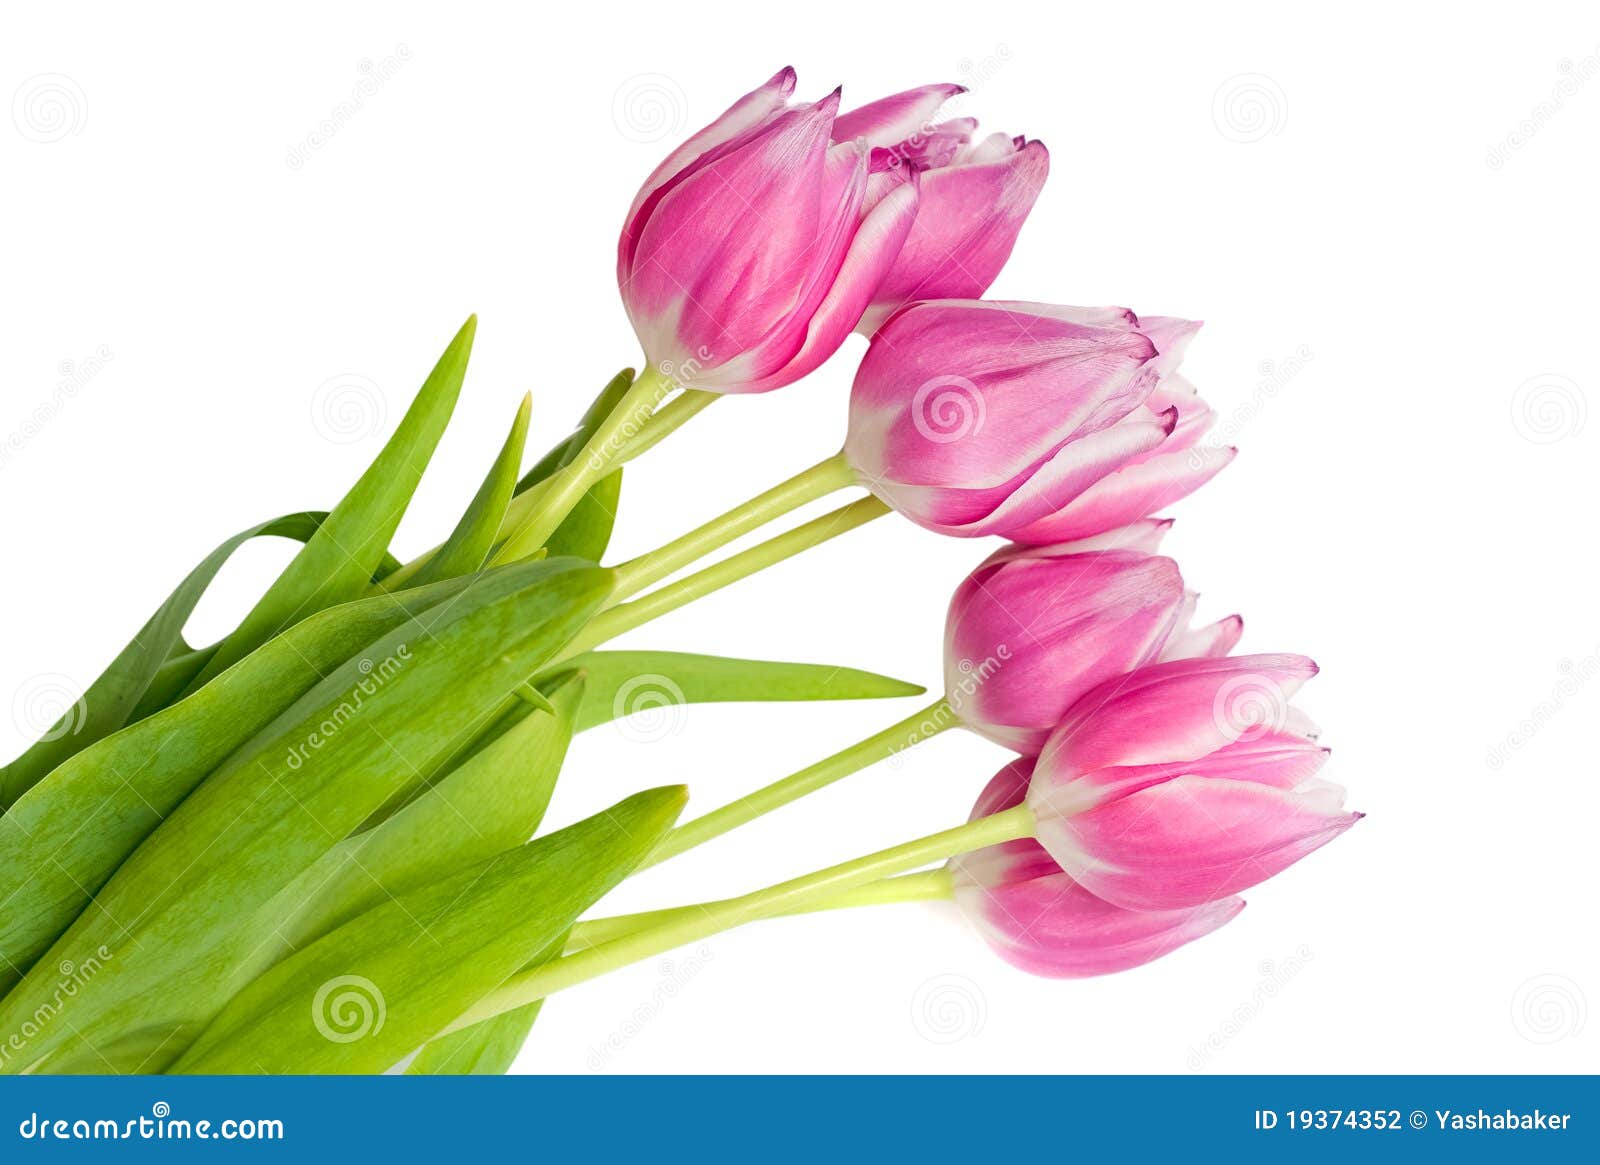 Bouquet of pink tulips stock photo. Image of stem, closeup - 19374352